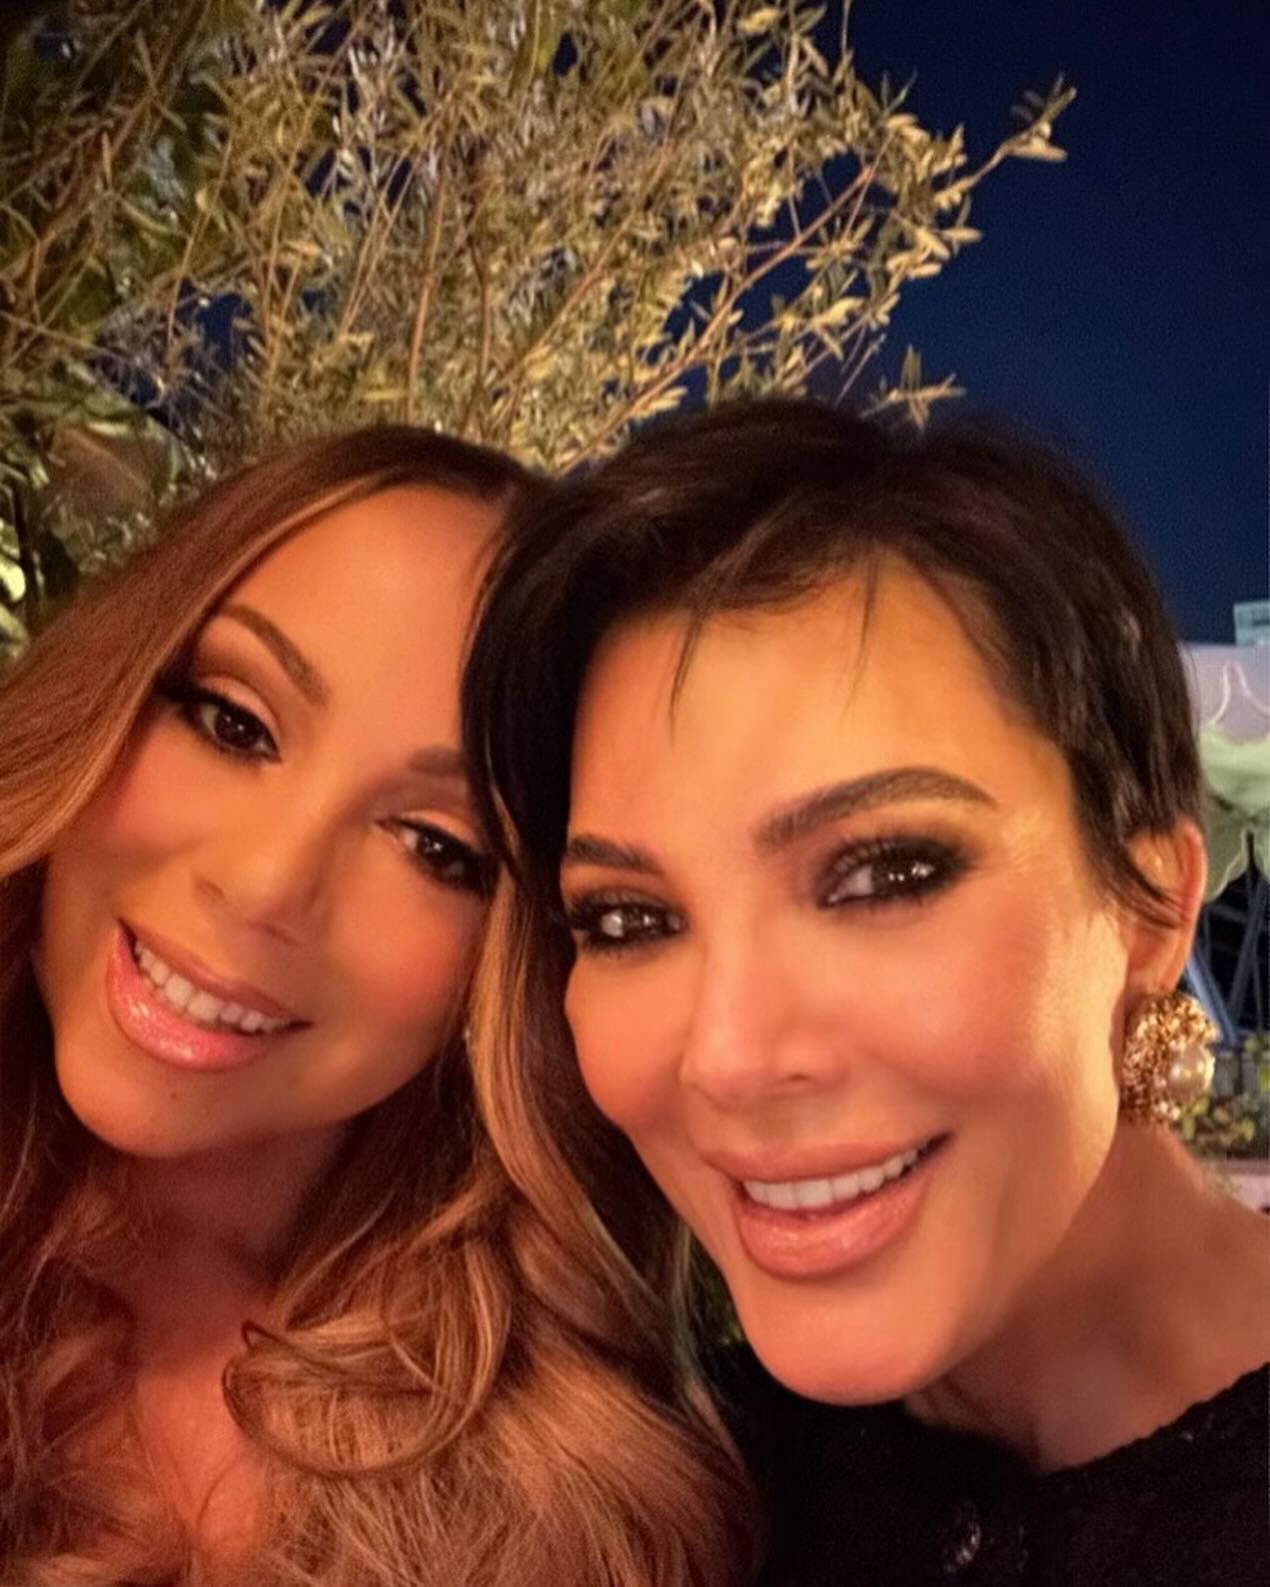 The momager's followers also begged her to stop using filters as she posed with Mariah Carey